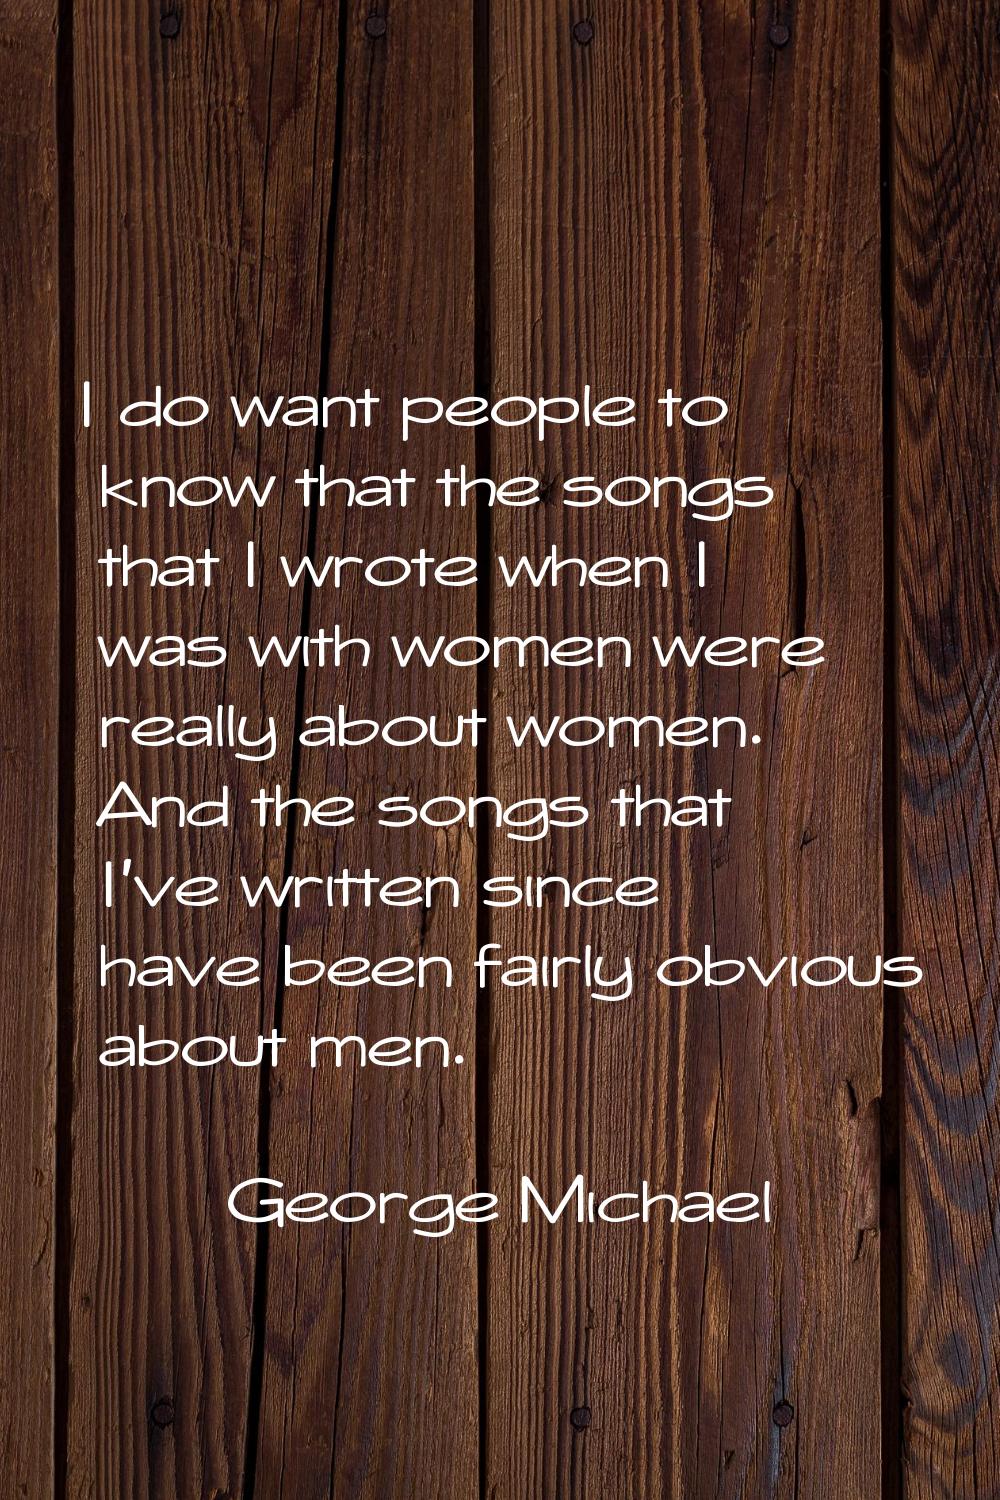 I do want people to know that the songs that I wrote when I was with women were really about women.